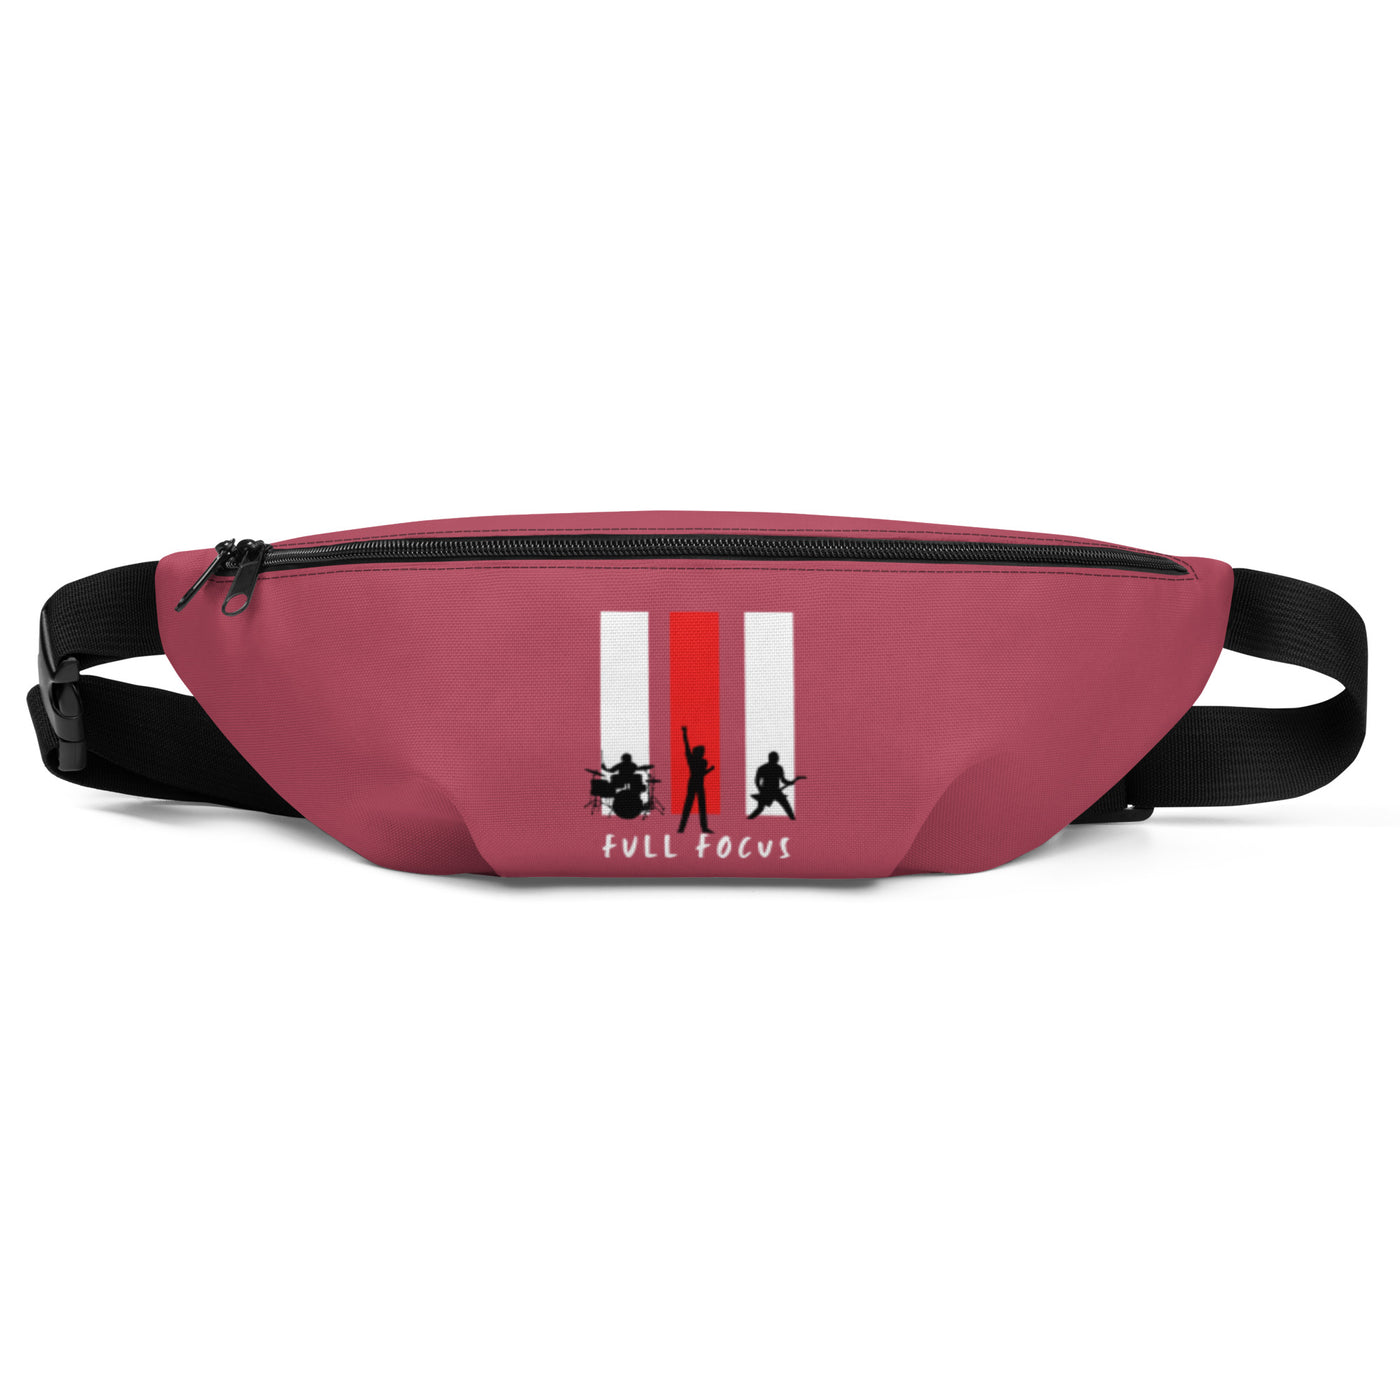 Hippie Pink Fanny Pack - Full Focus